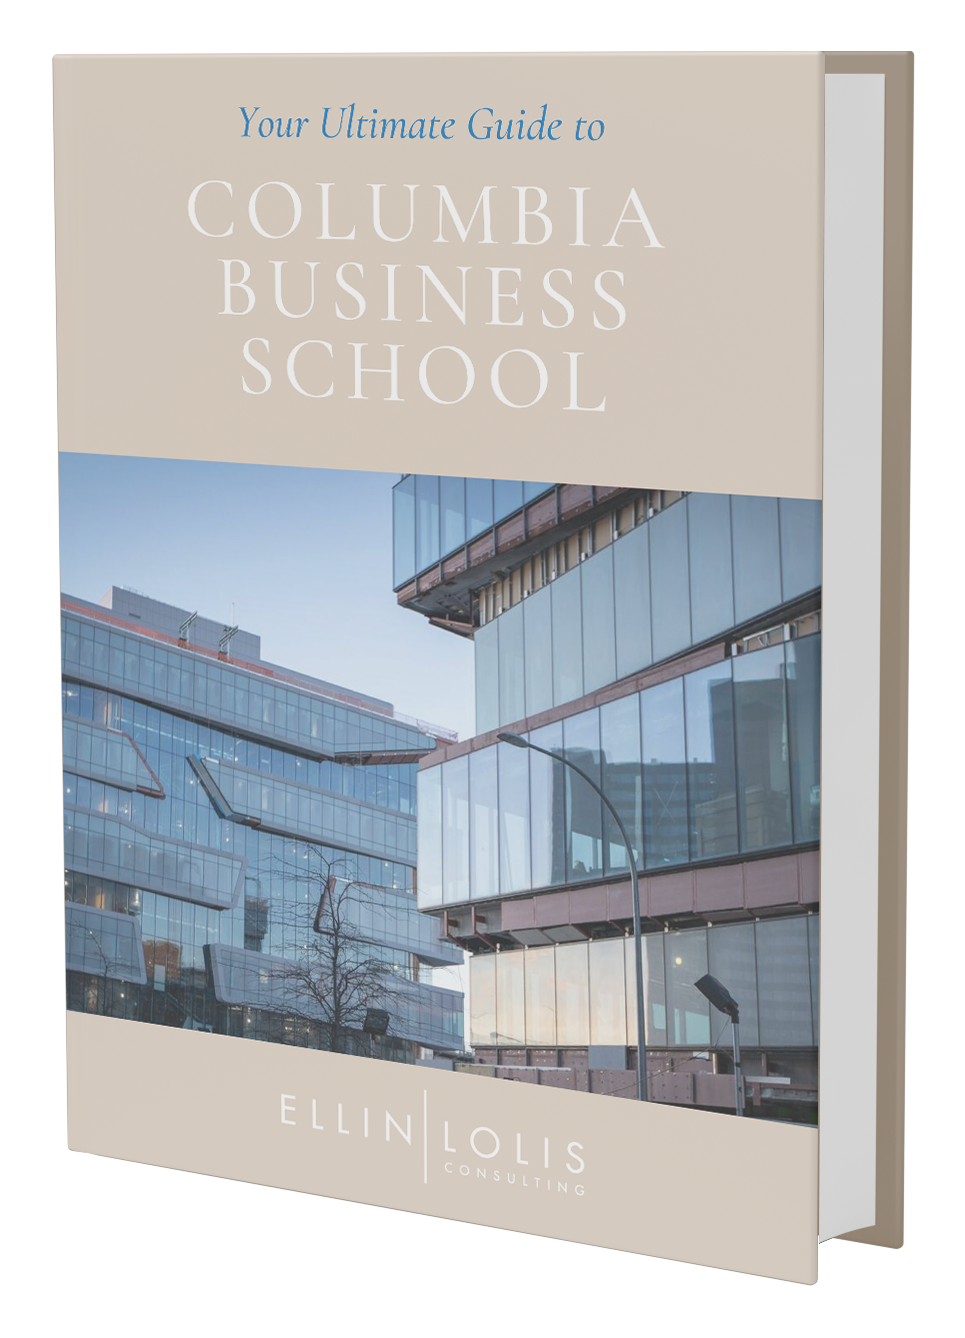 Your Ultimate Guide to Columbia Business School